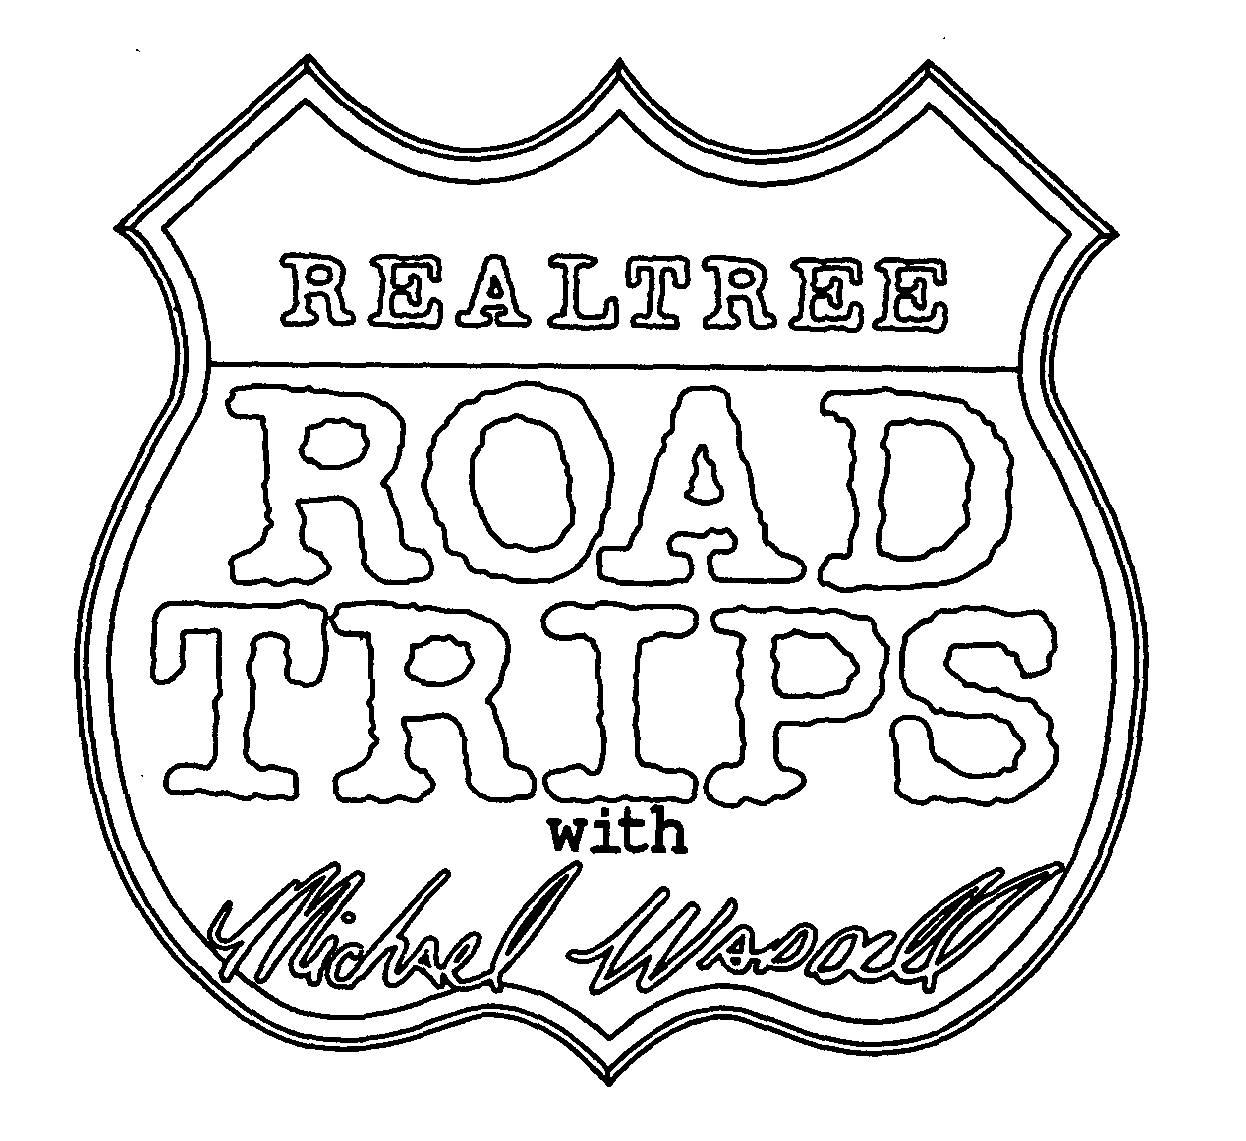  REALTREE ROADTRIPS WITH MICHAEL WADDELL